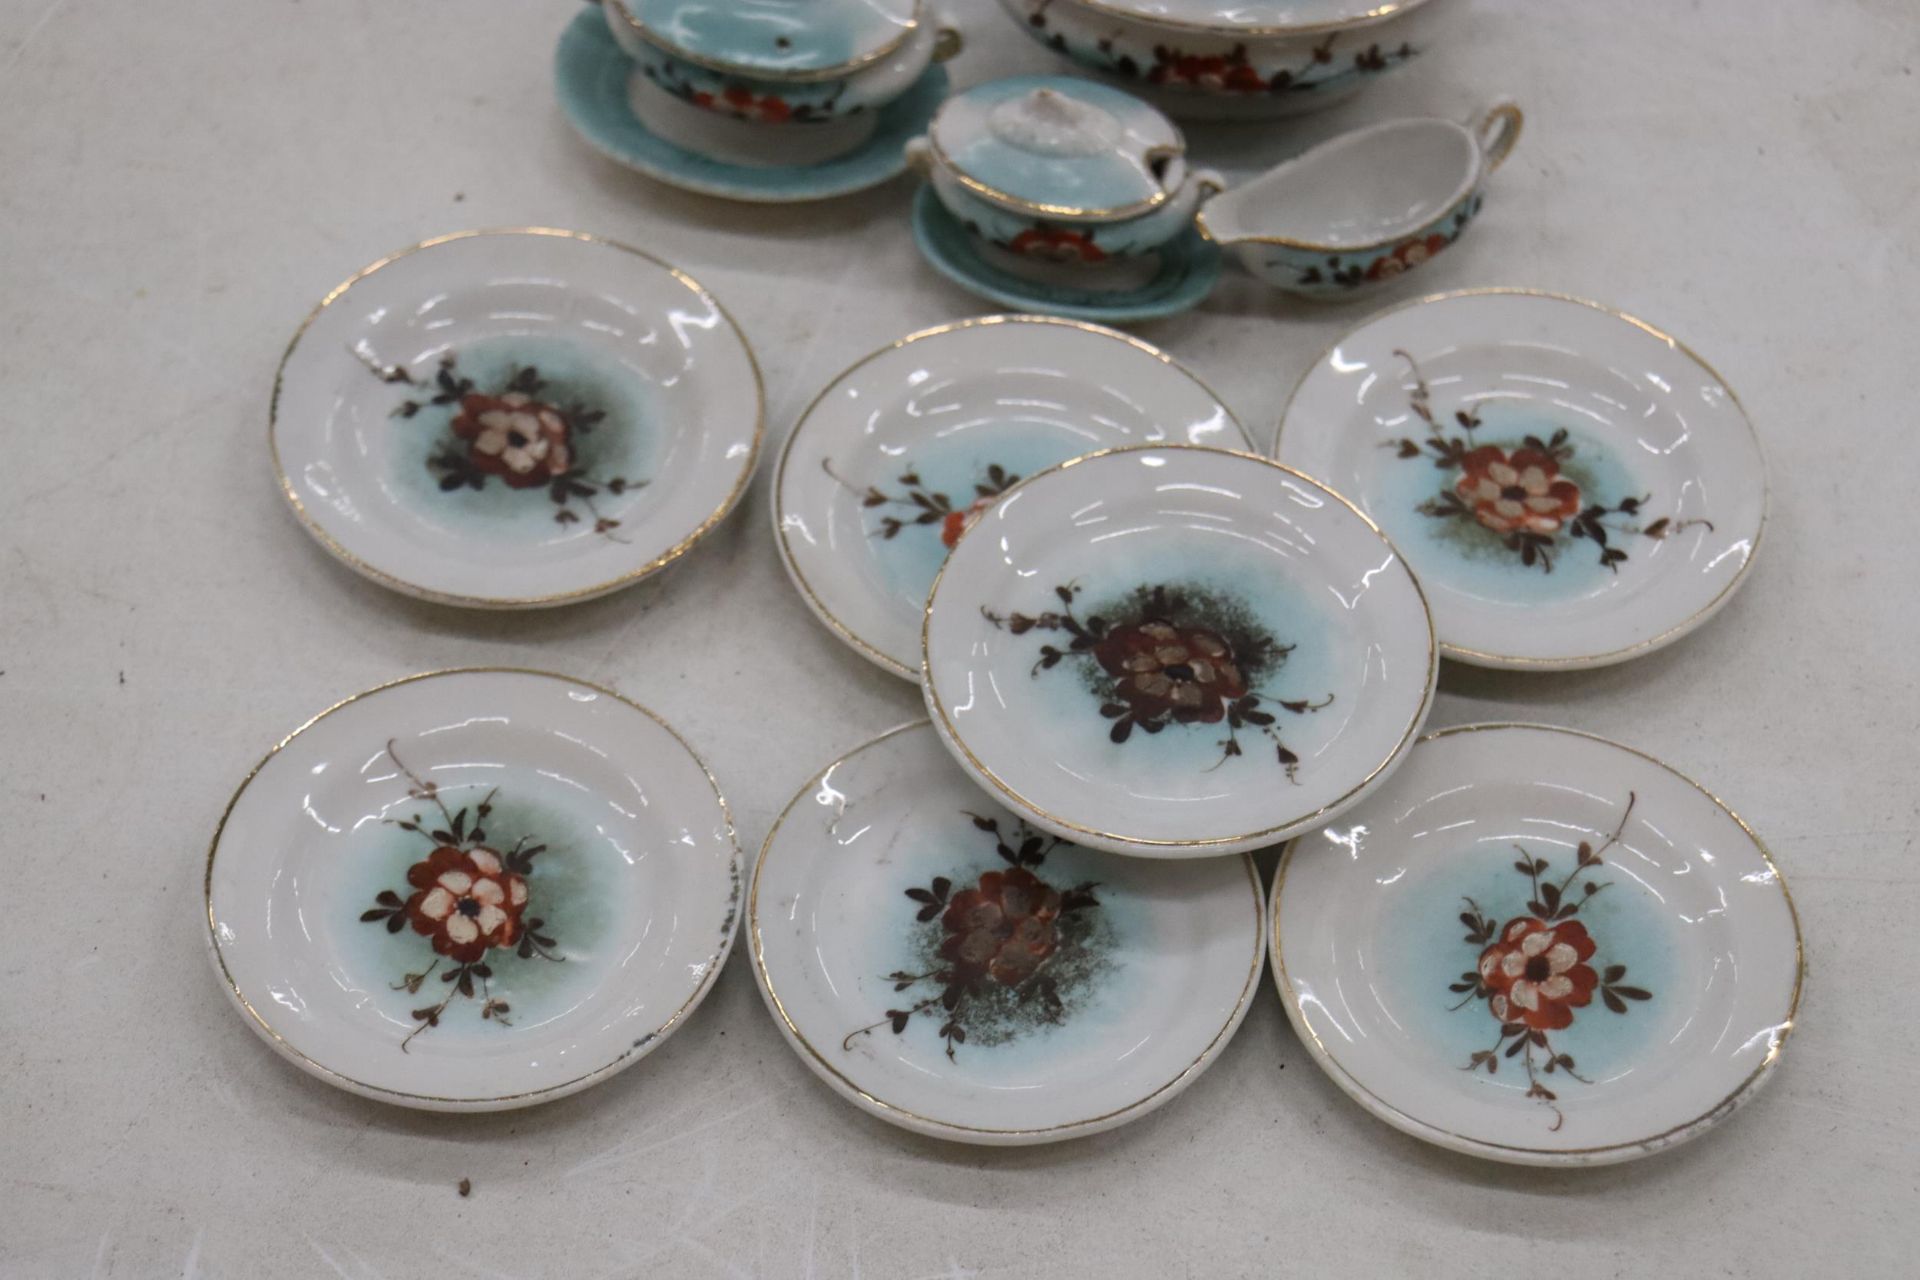 A VINTAGE DOLL'S TEASET AND DINNER SERVICE TO INCLUDE PLATES, CUPS, SAUCERS, TEAPOT, ETC - Image 7 of 10